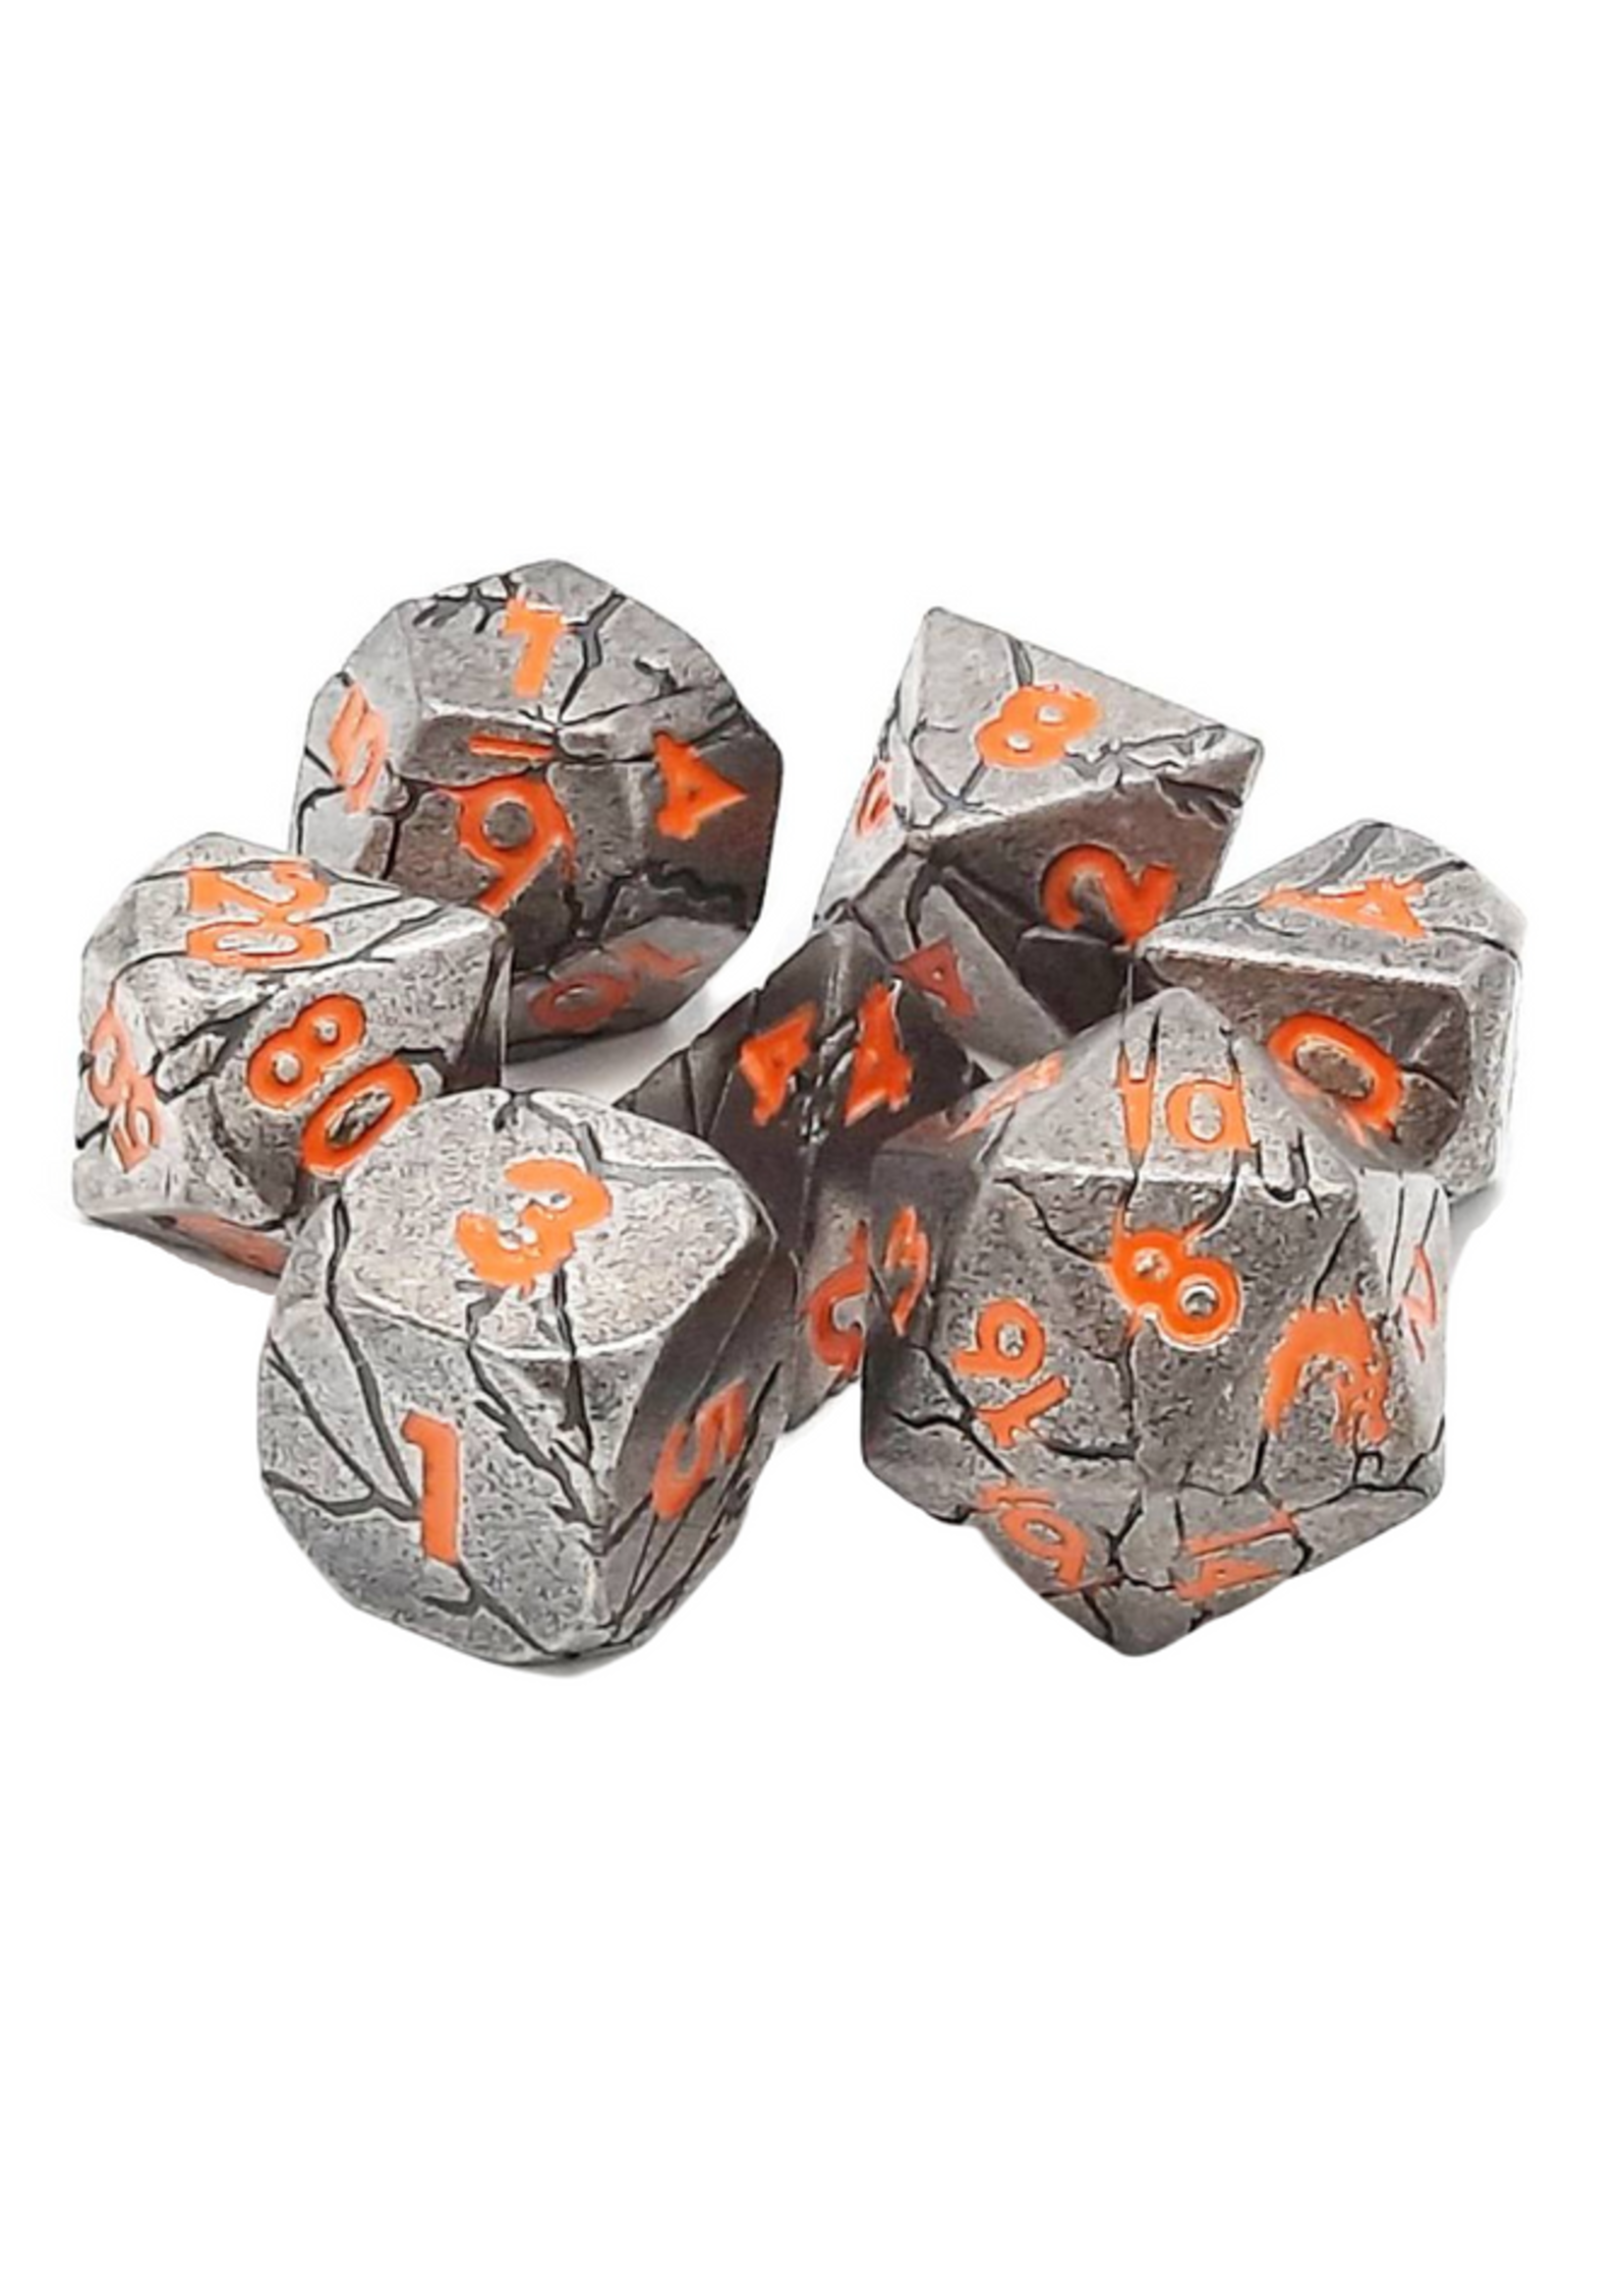 Old School Dice Old School 7 Piece RPG Metal Dice Set: Orc Forged -Ancient Silver w/ Orange